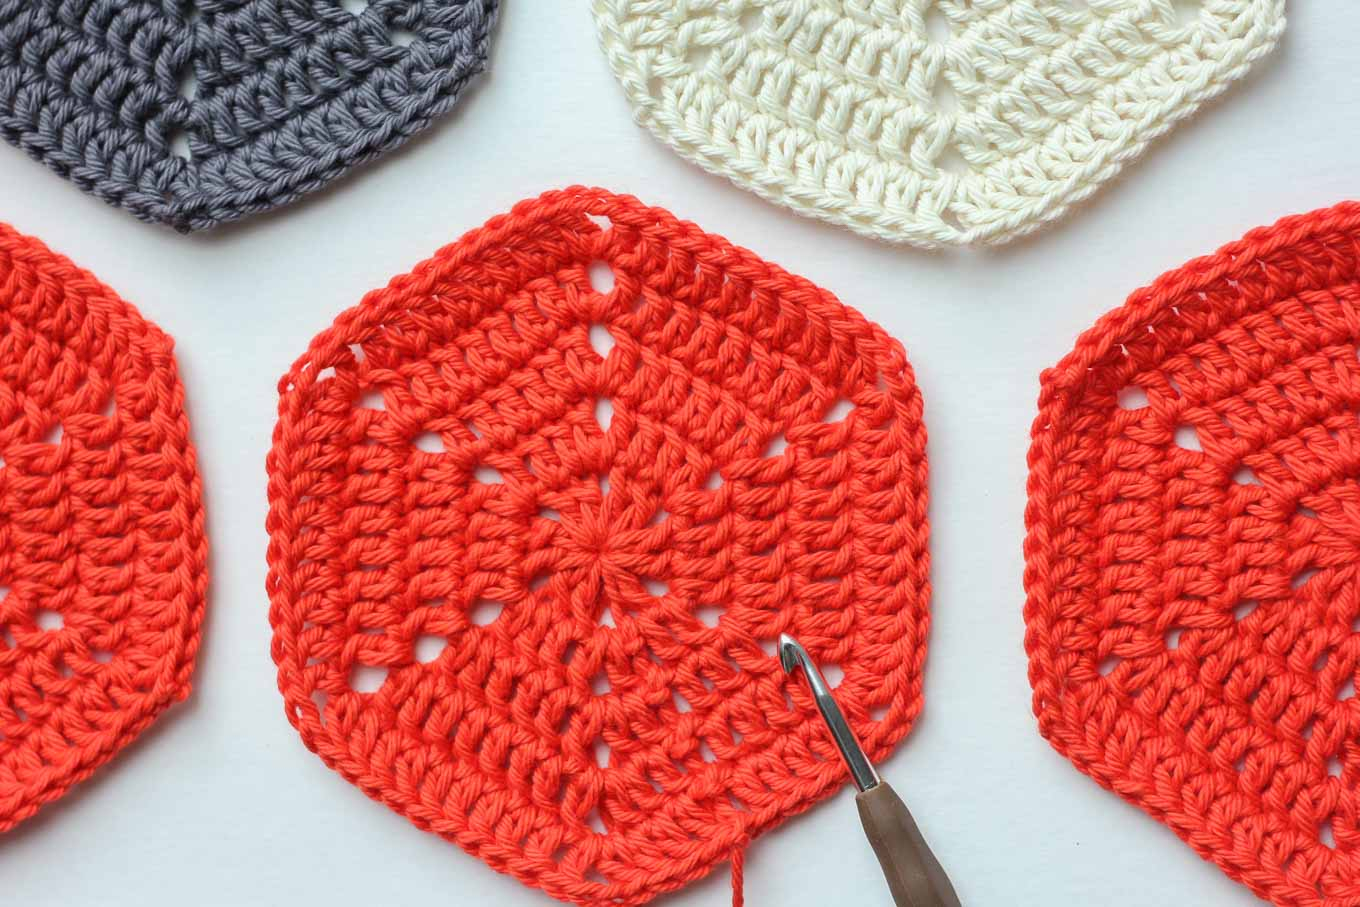 Crochet For Beginners Patterns Free How To Corner To Corner Crochet C2c For Beginners